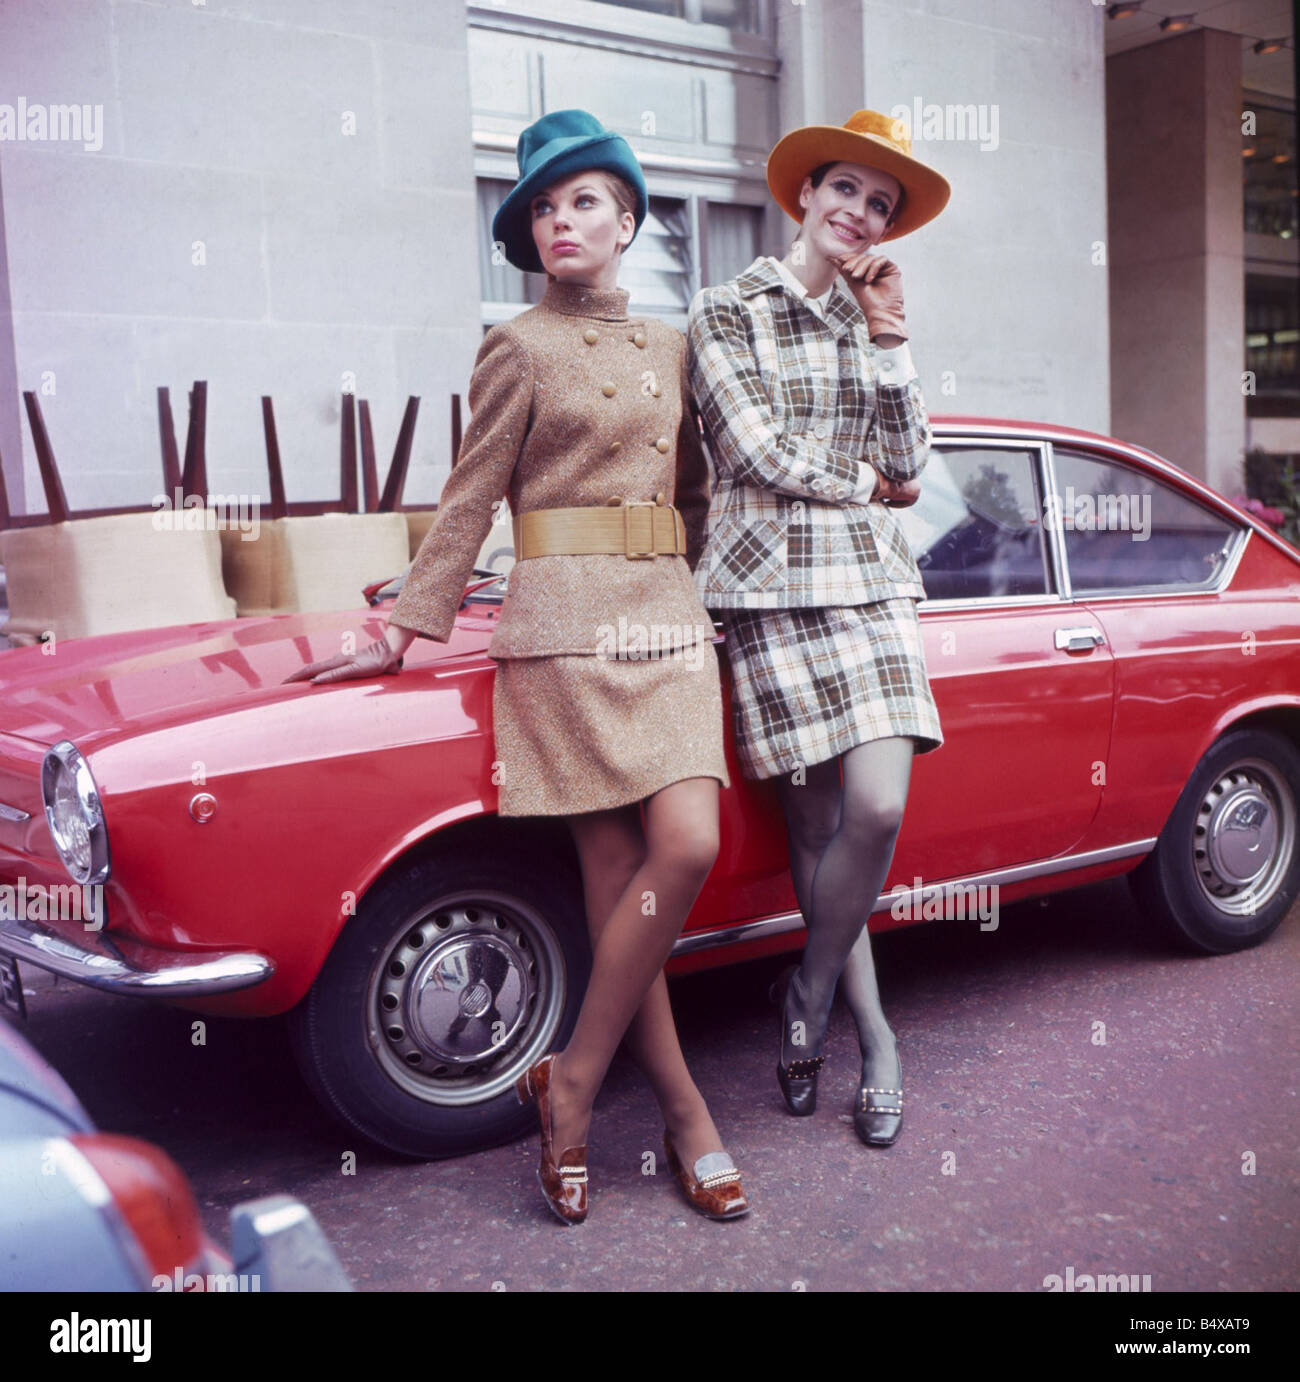 Sixties Fashion 1960s clothing Women with hats leaning on car Wool Trends International Show featuring Irish Tweed fashions Stock Photo